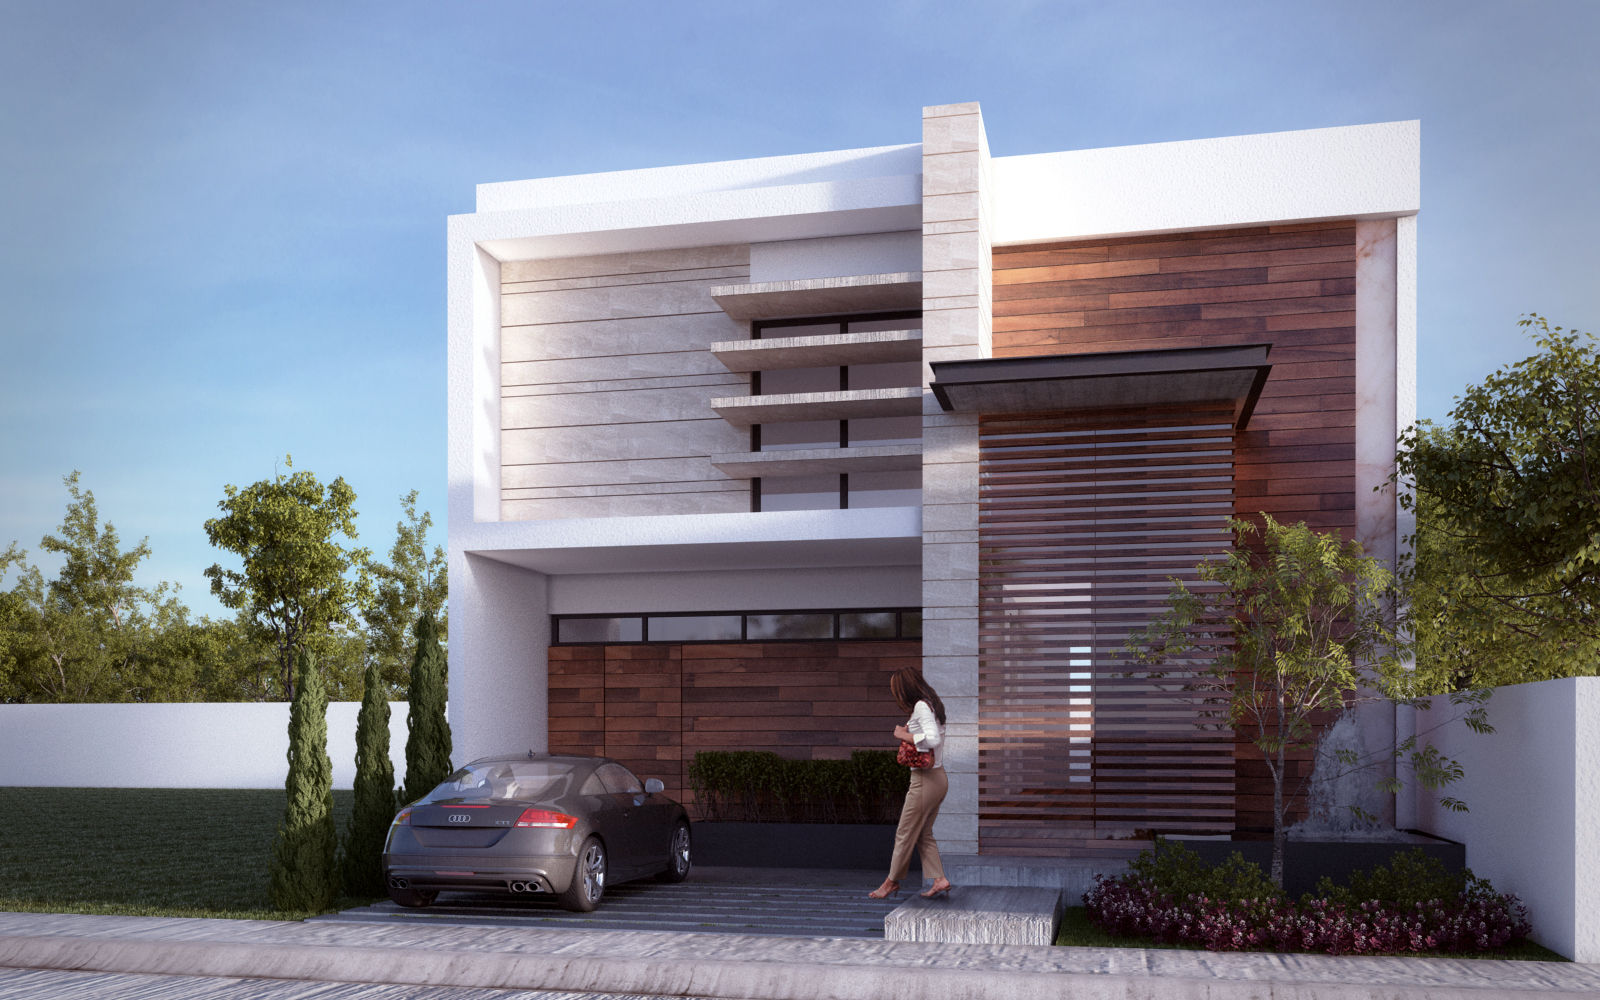 MITICA RESIDENCIAL , ALONSO ARQUITECTOS ALONSO ARQUITECTOS Minimalist houses